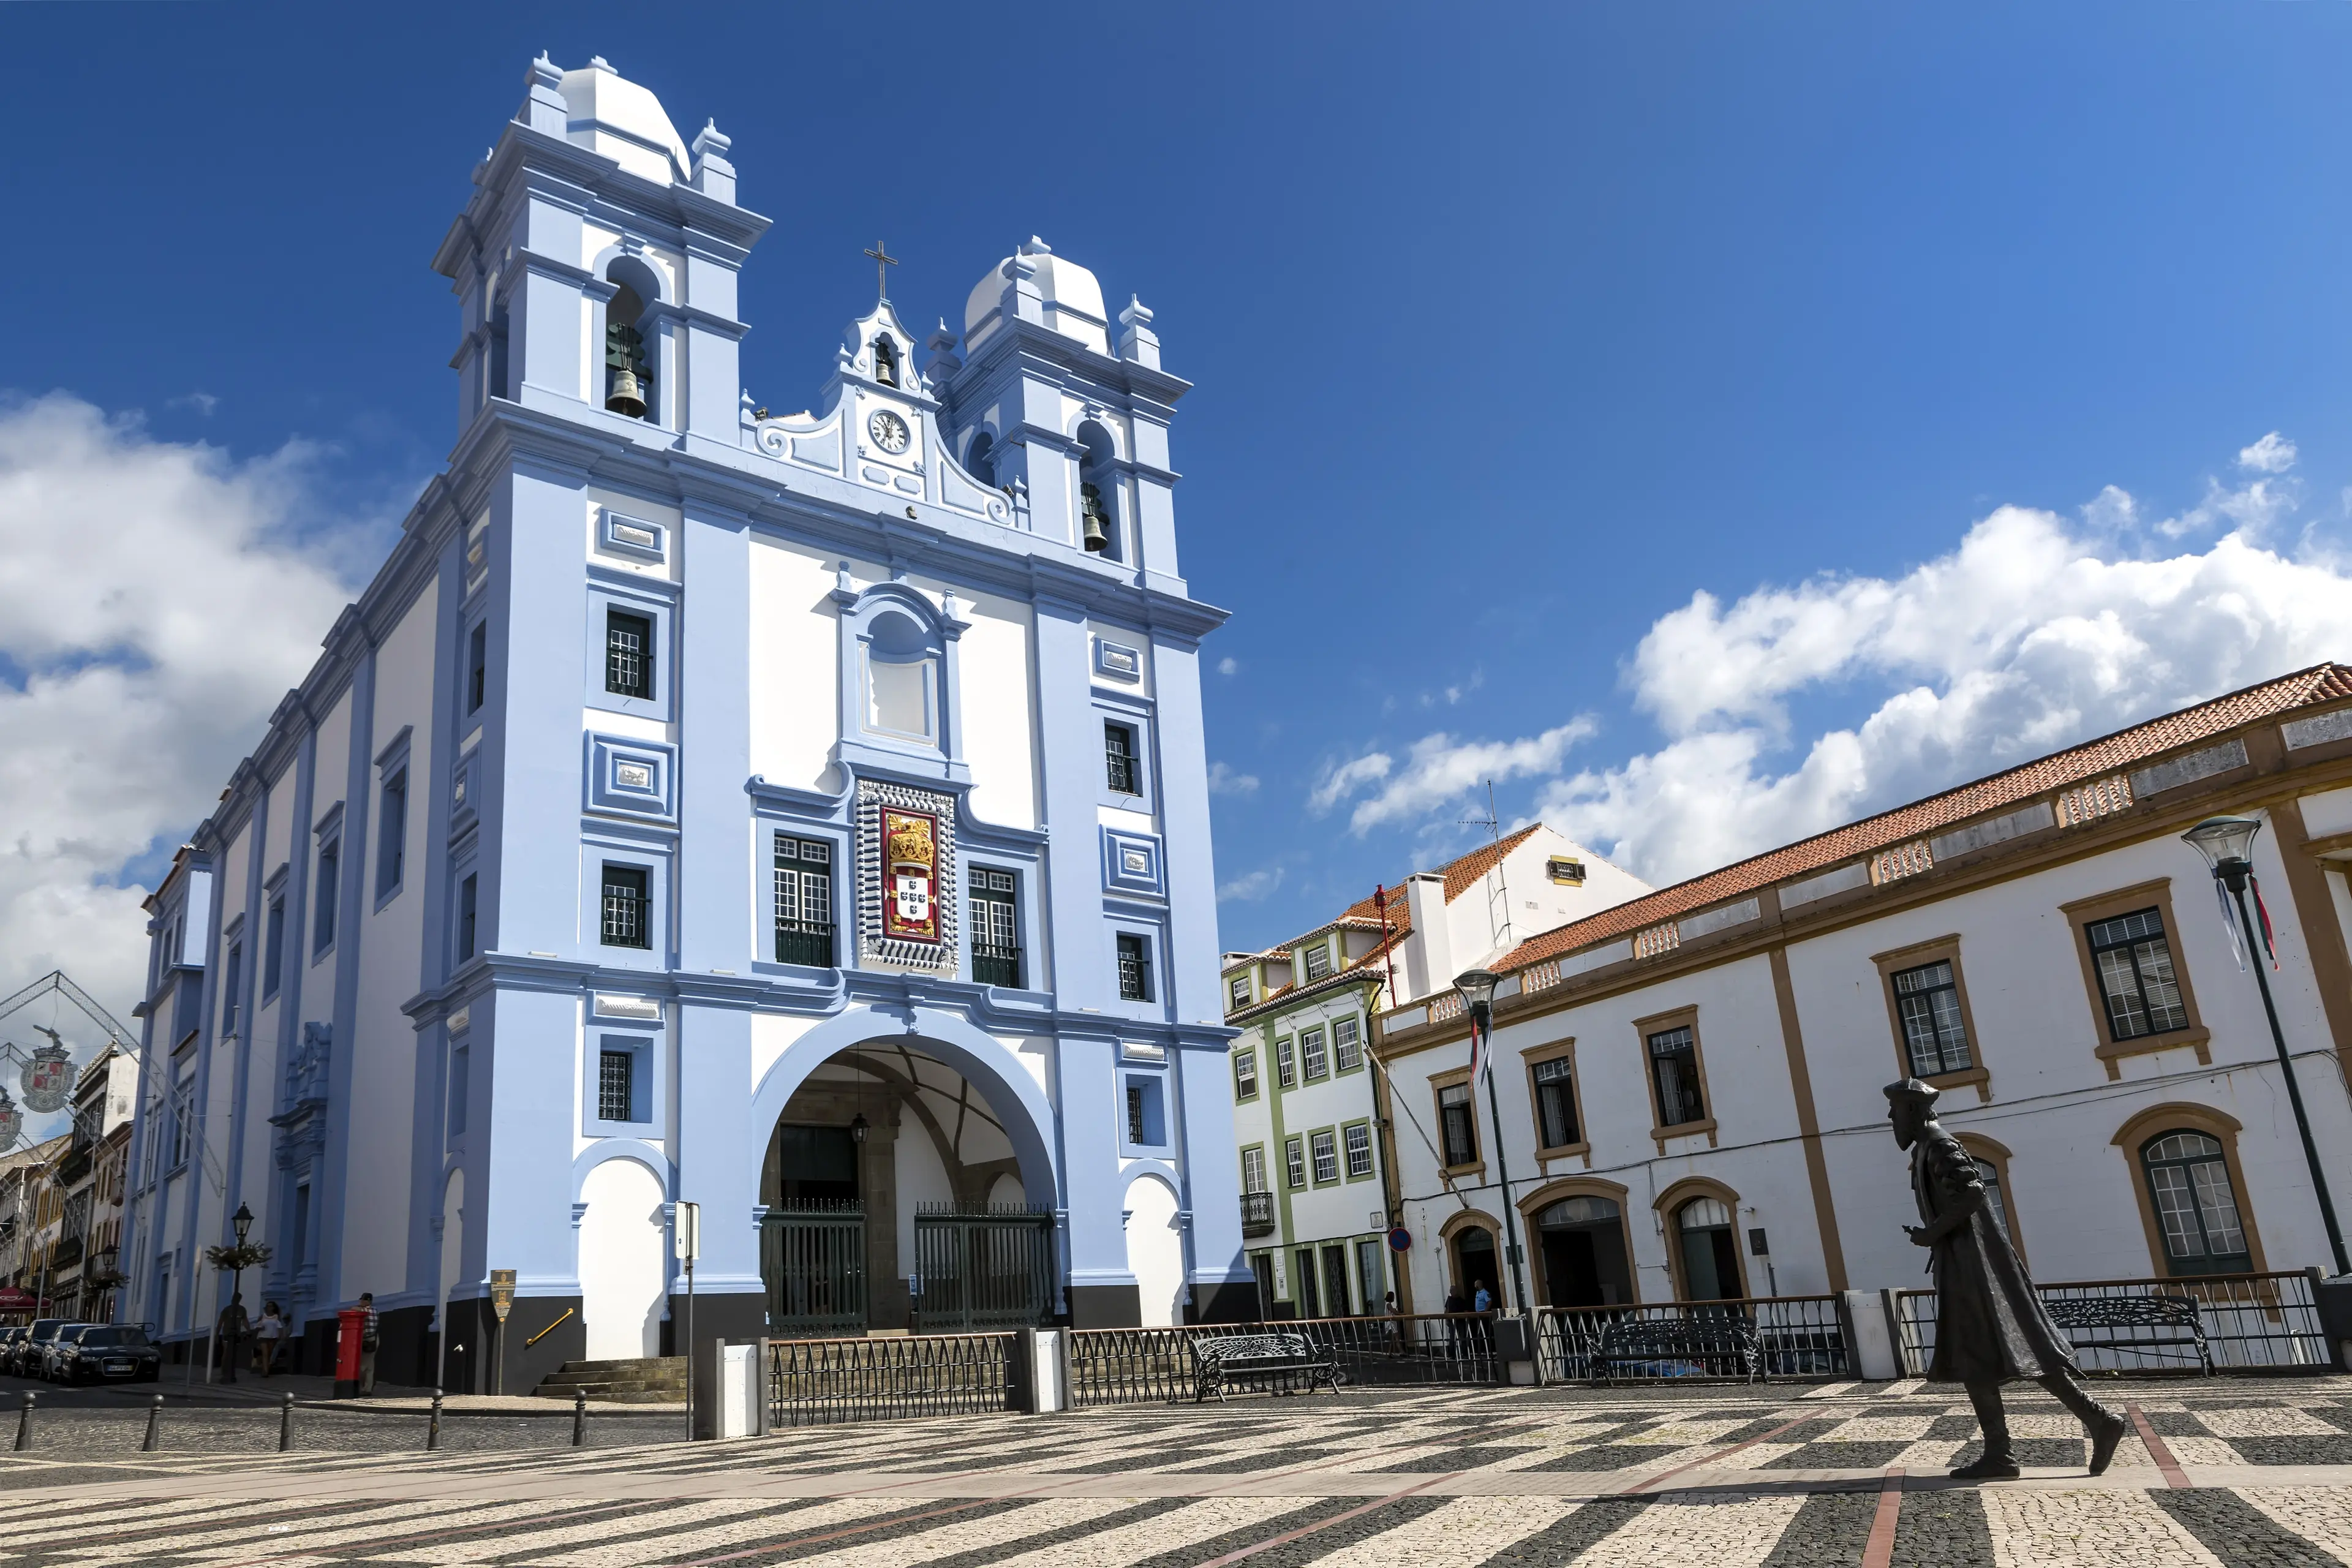 3-Day Azores Family Vacation: Sightseeing, Relaxation, Food & Wine